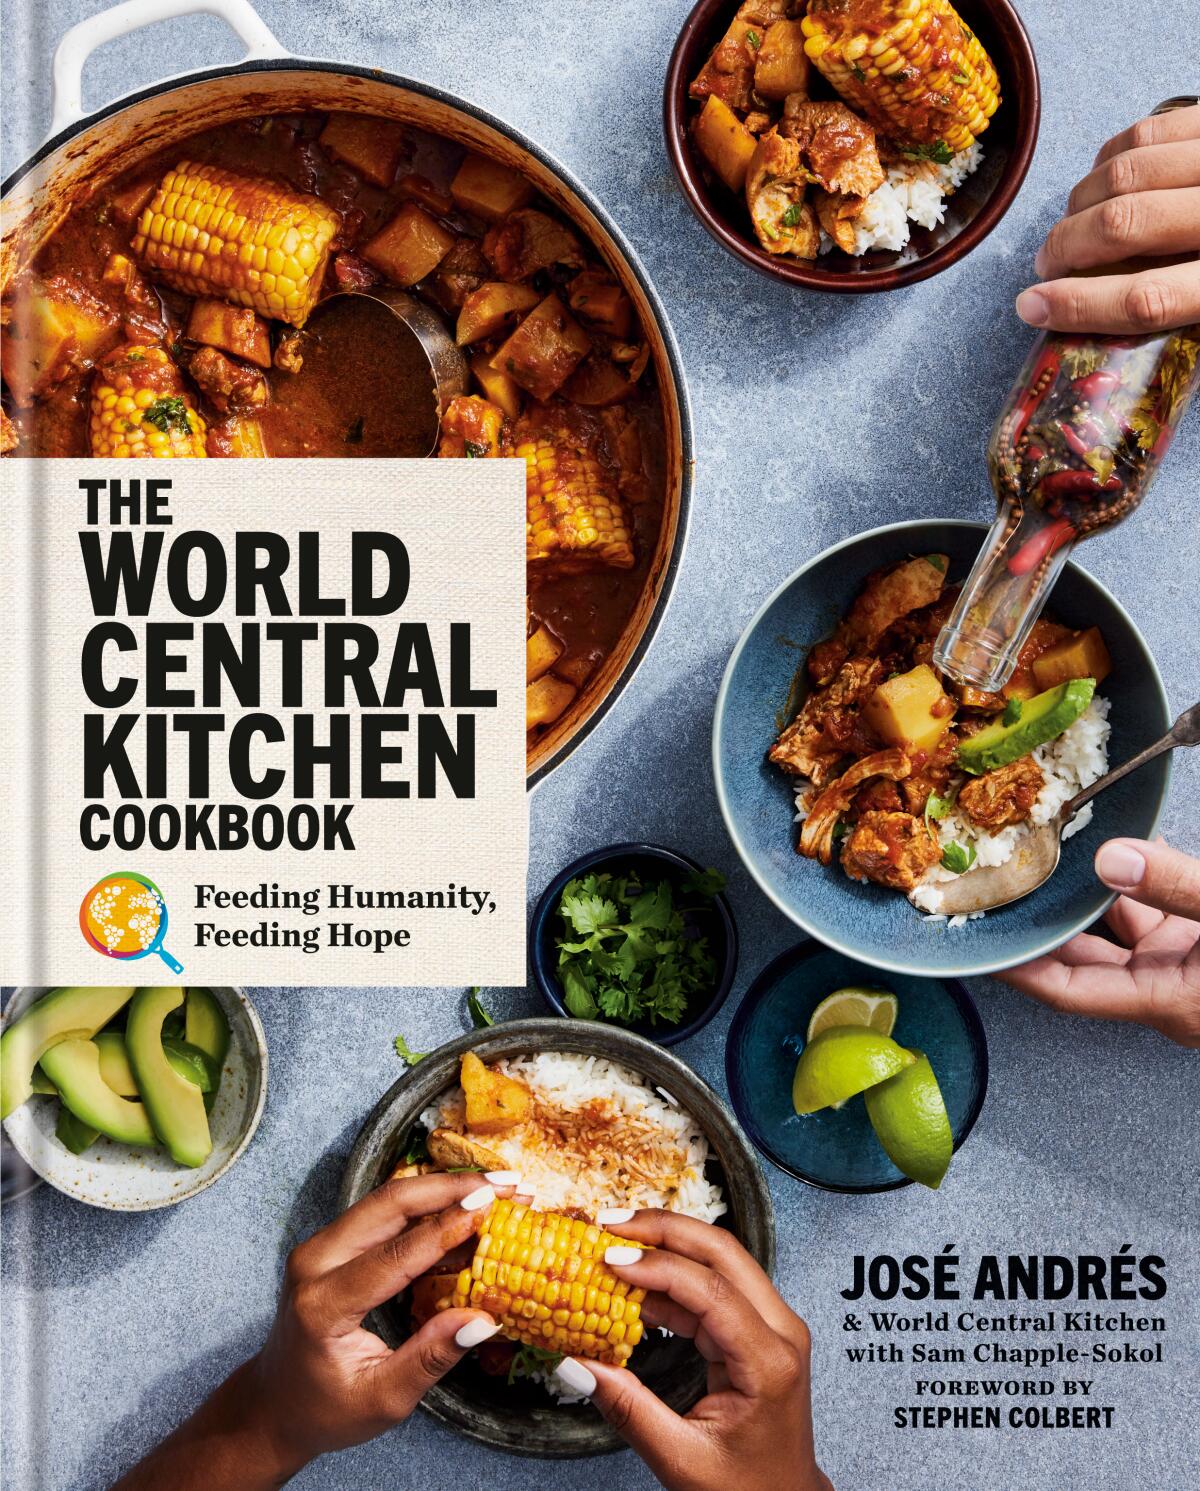 The cover of the World Central Kitchen cookbook. Hands pour hot sauce a lift food. A stew in a pot in one corner.